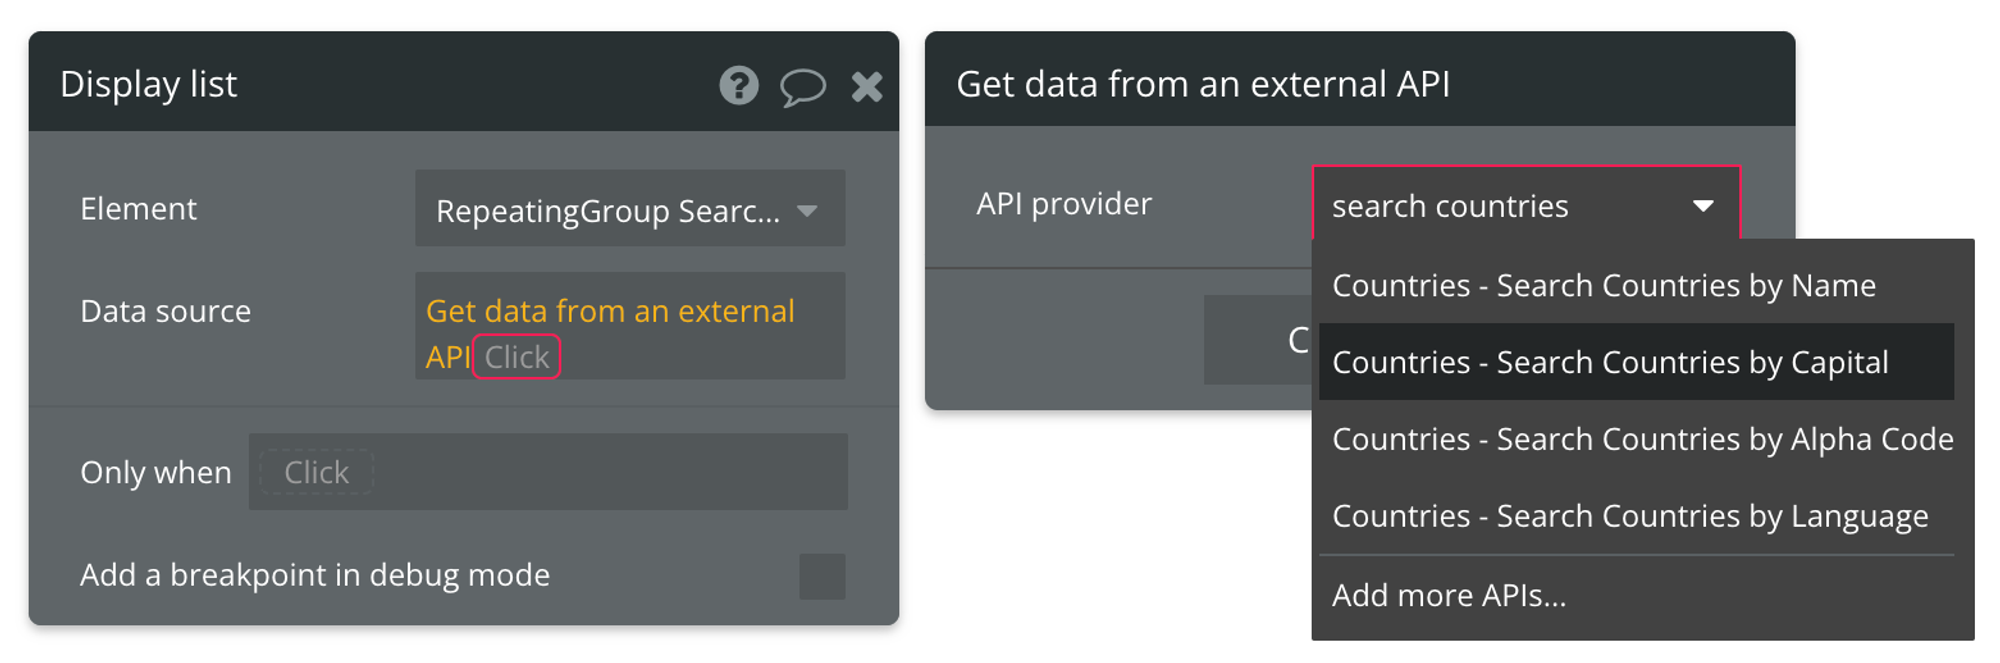 Select "Get data from external API" from the list of data sources, then find Countries - Search Countries by Capital from the list of API providers